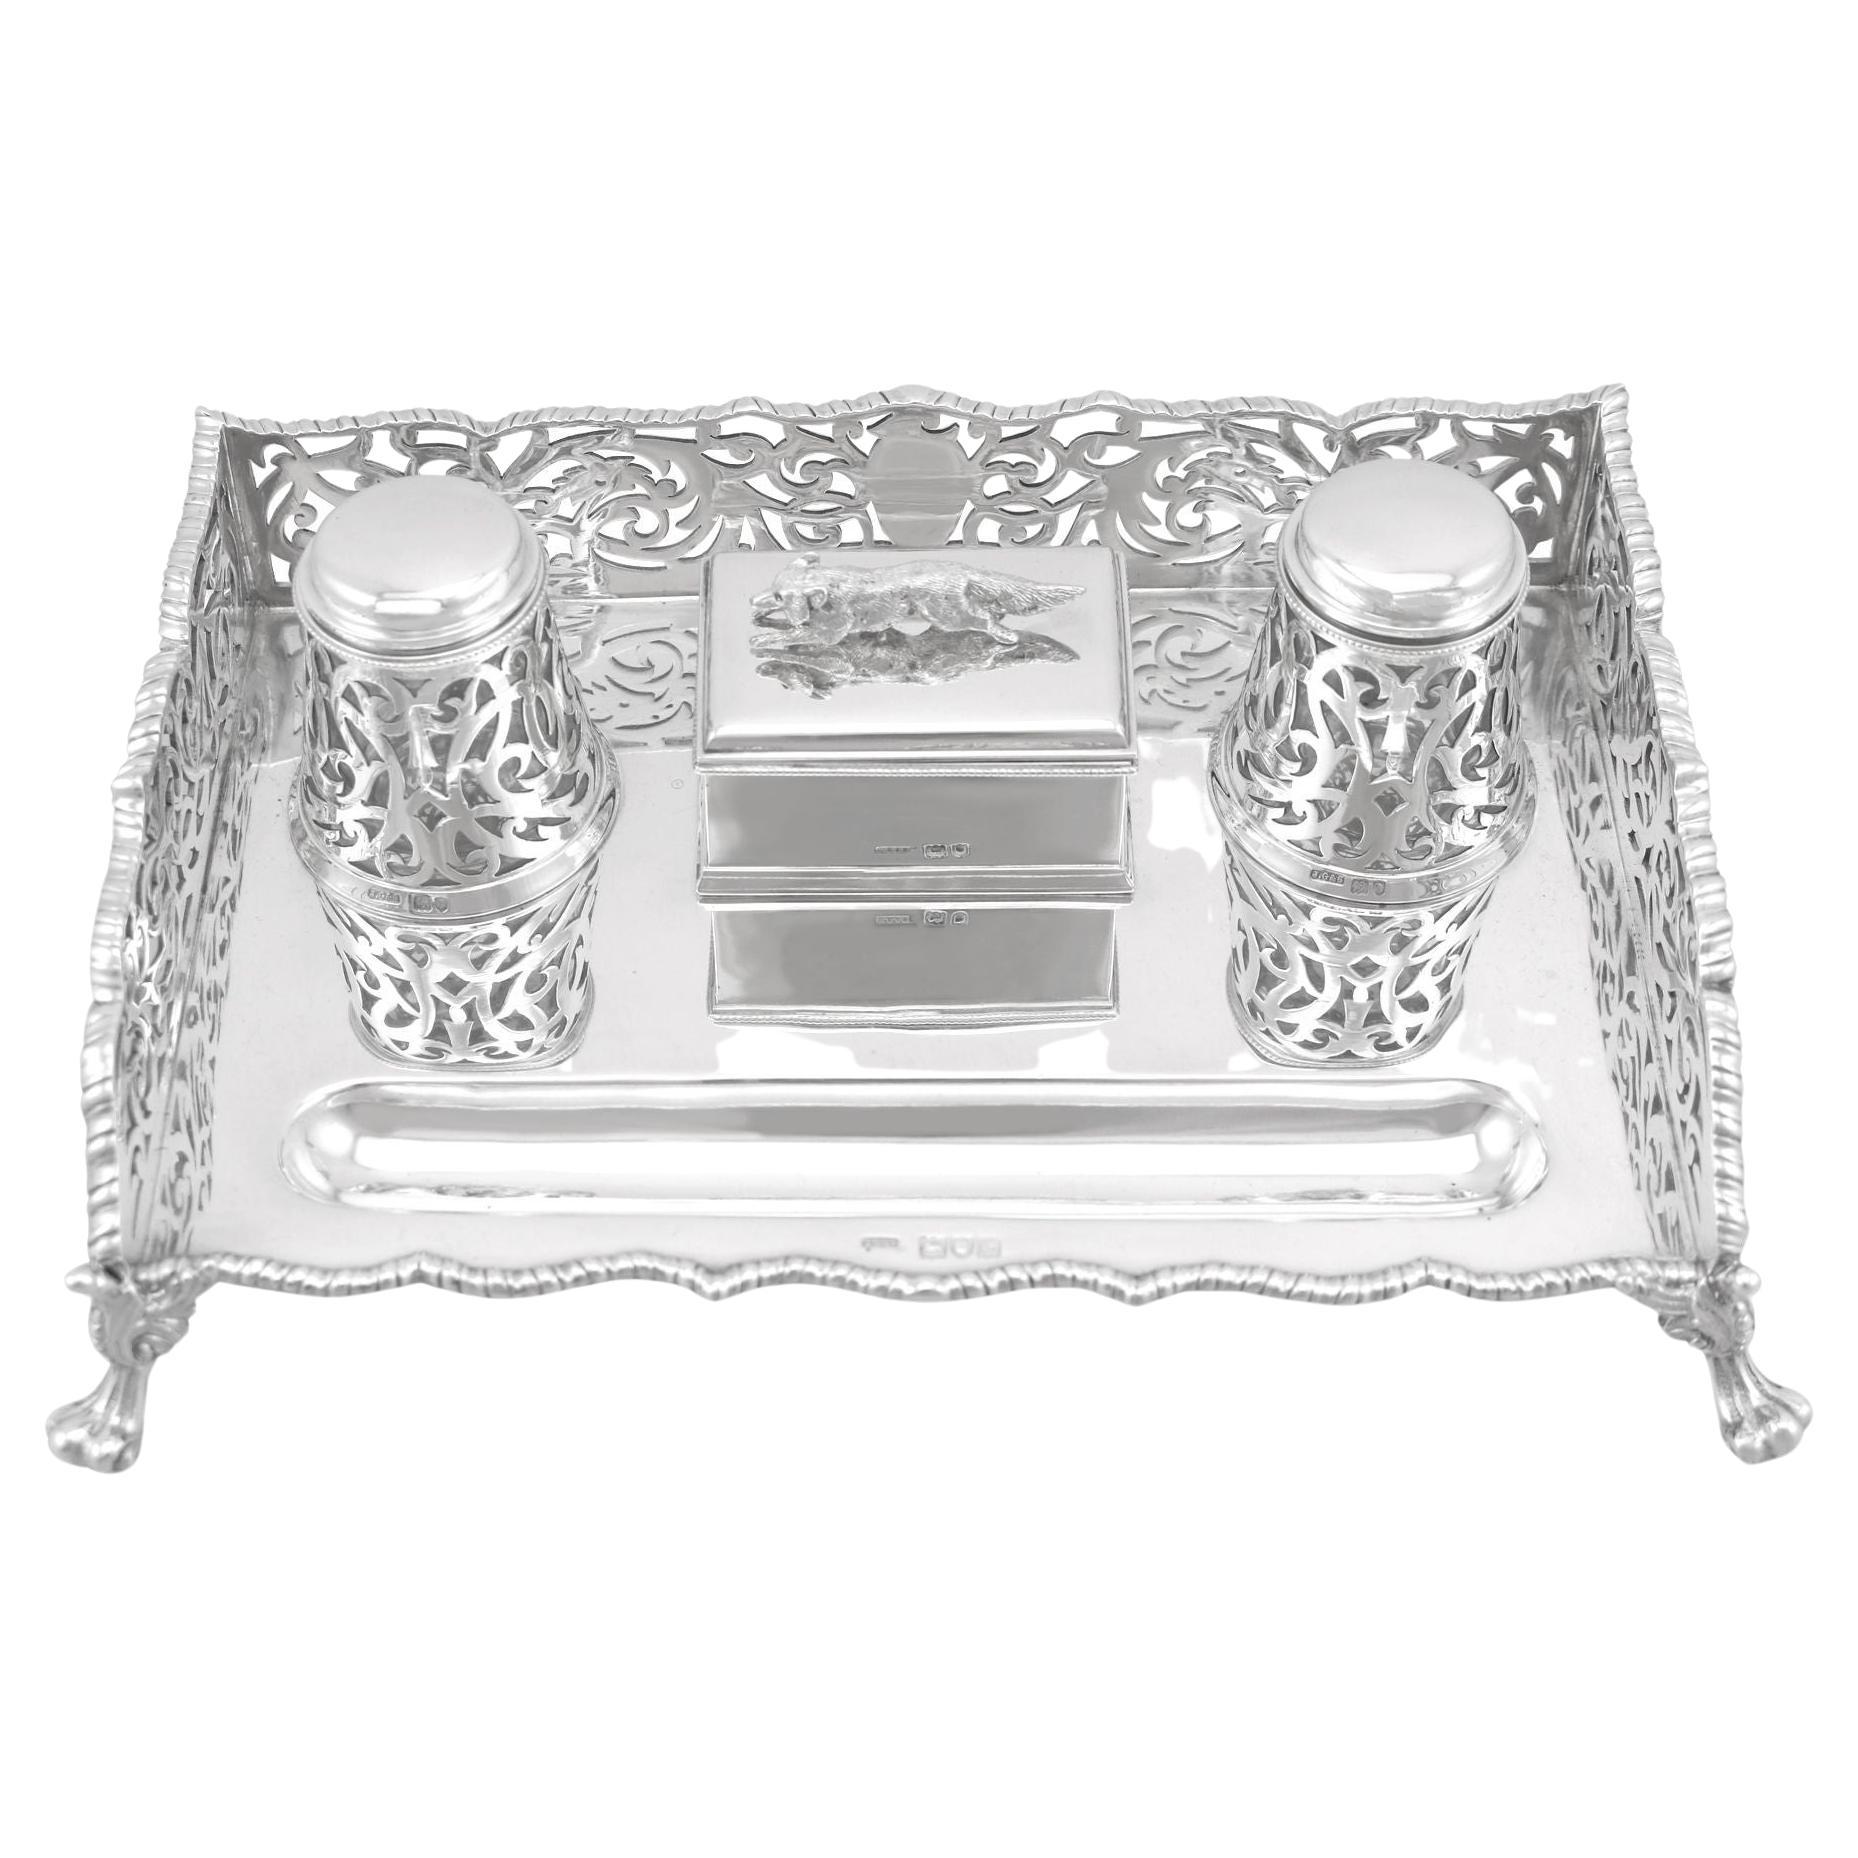 John Grinsell & Sons Antique Victorian 1898 Sterling Silver Gallery Inkstand